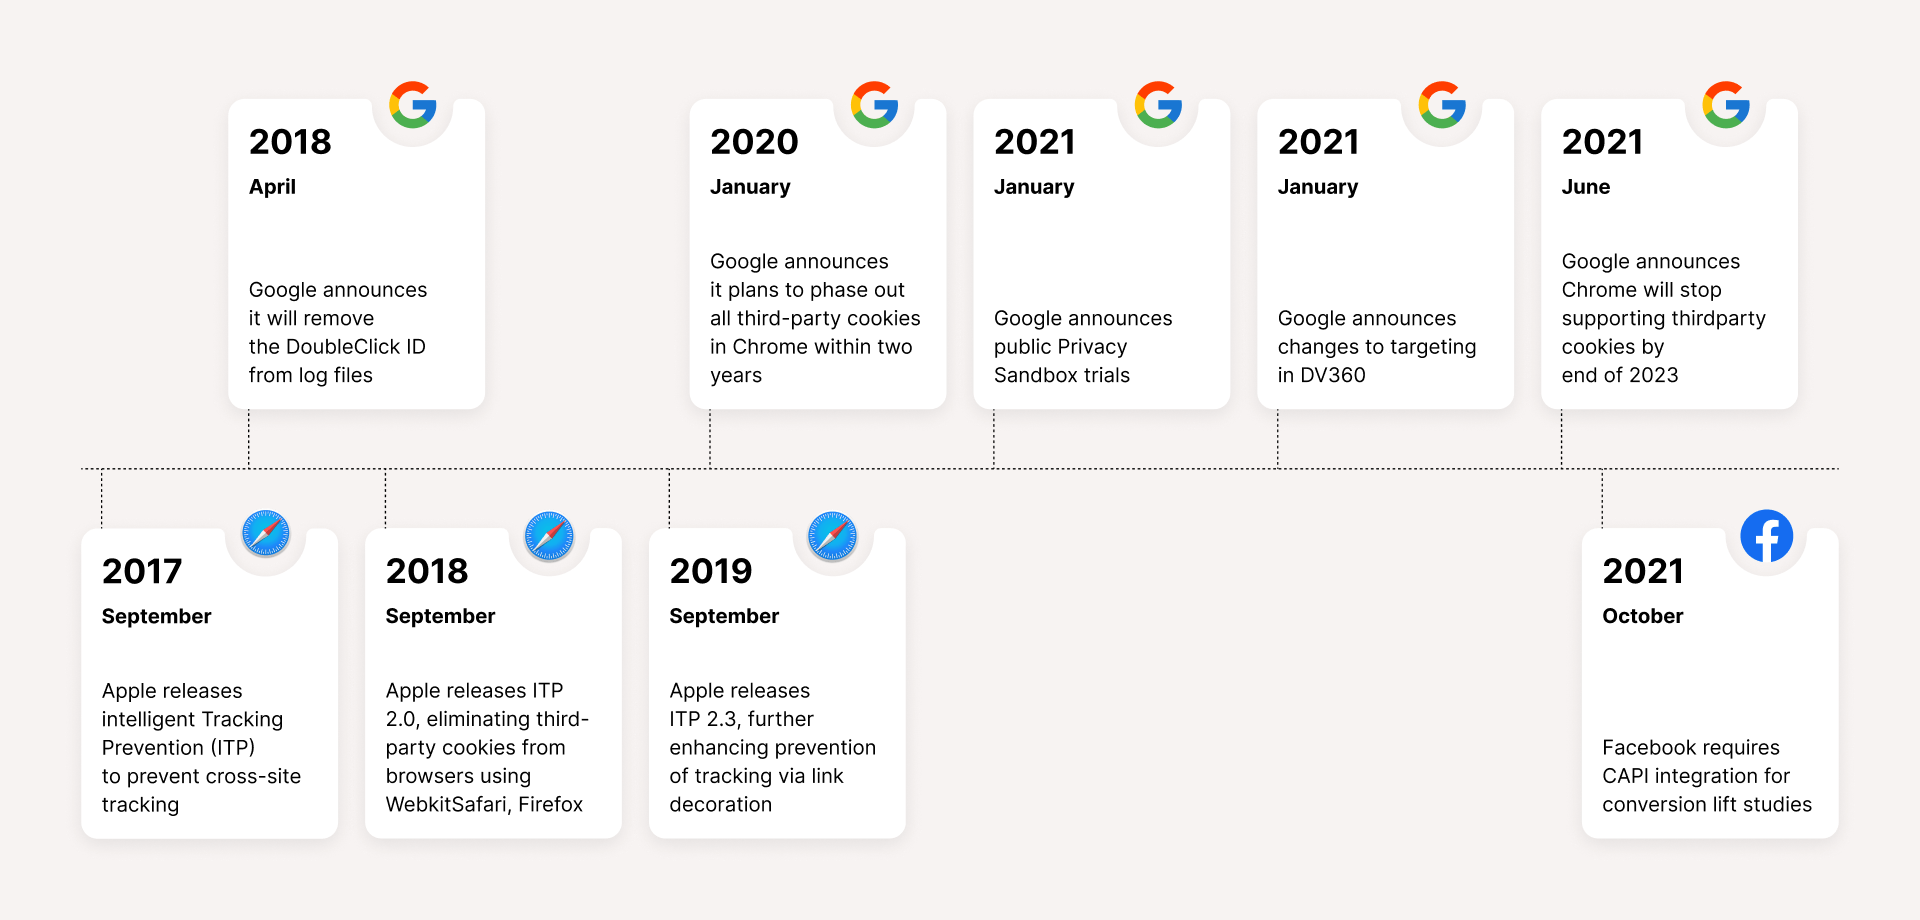 Matterkind's timeline of Google & Apple announcements/releases (2018-2021)